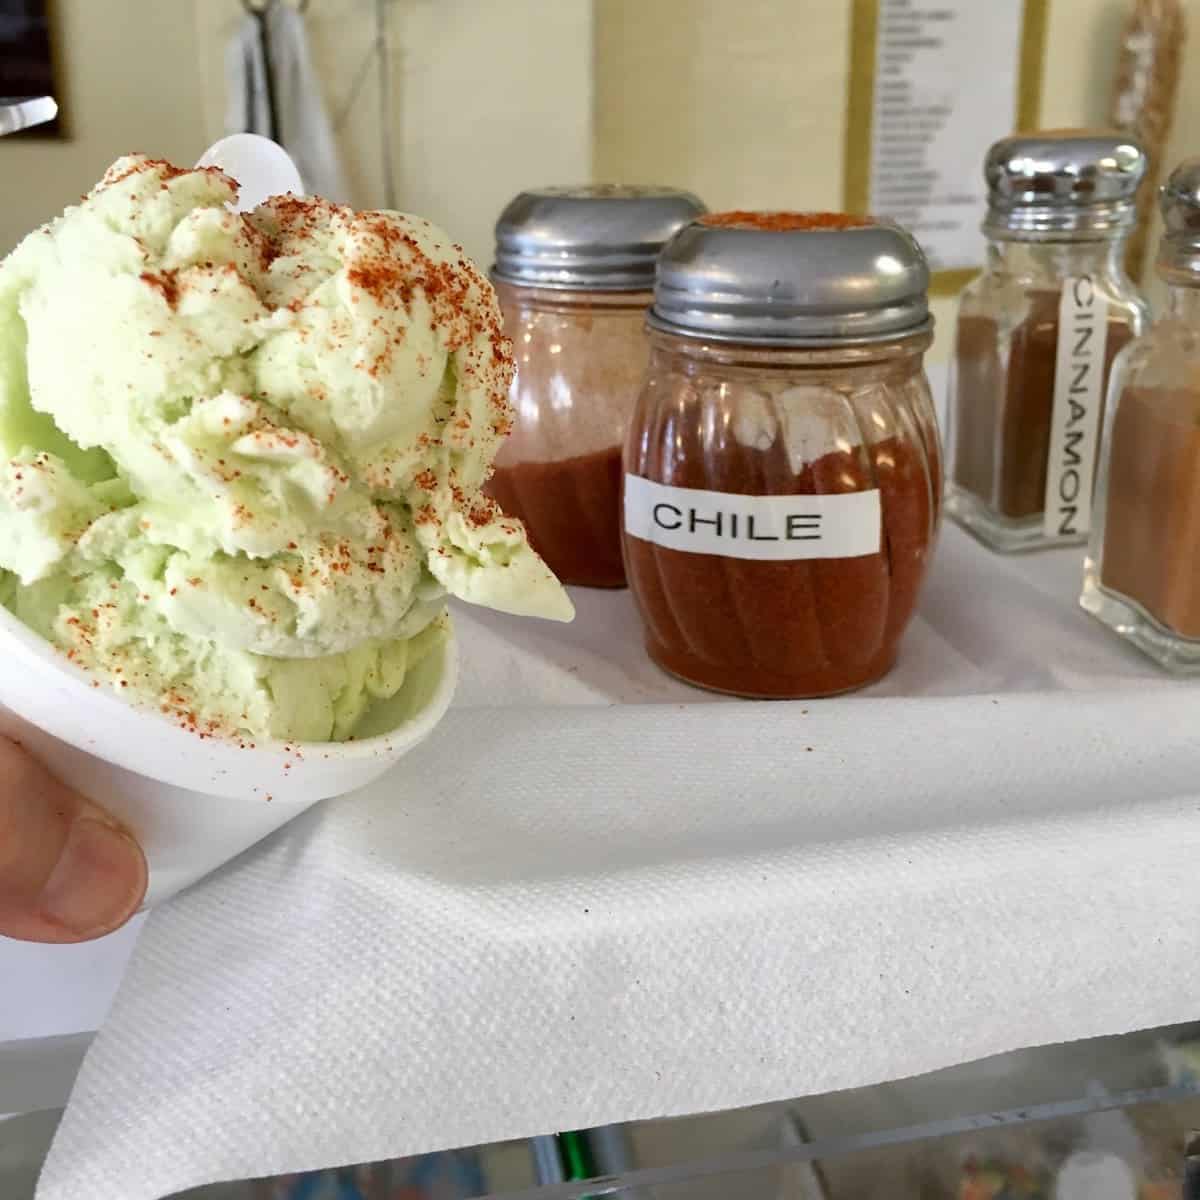 at the ice cream parlor with avocado ice cream topped with chili powder